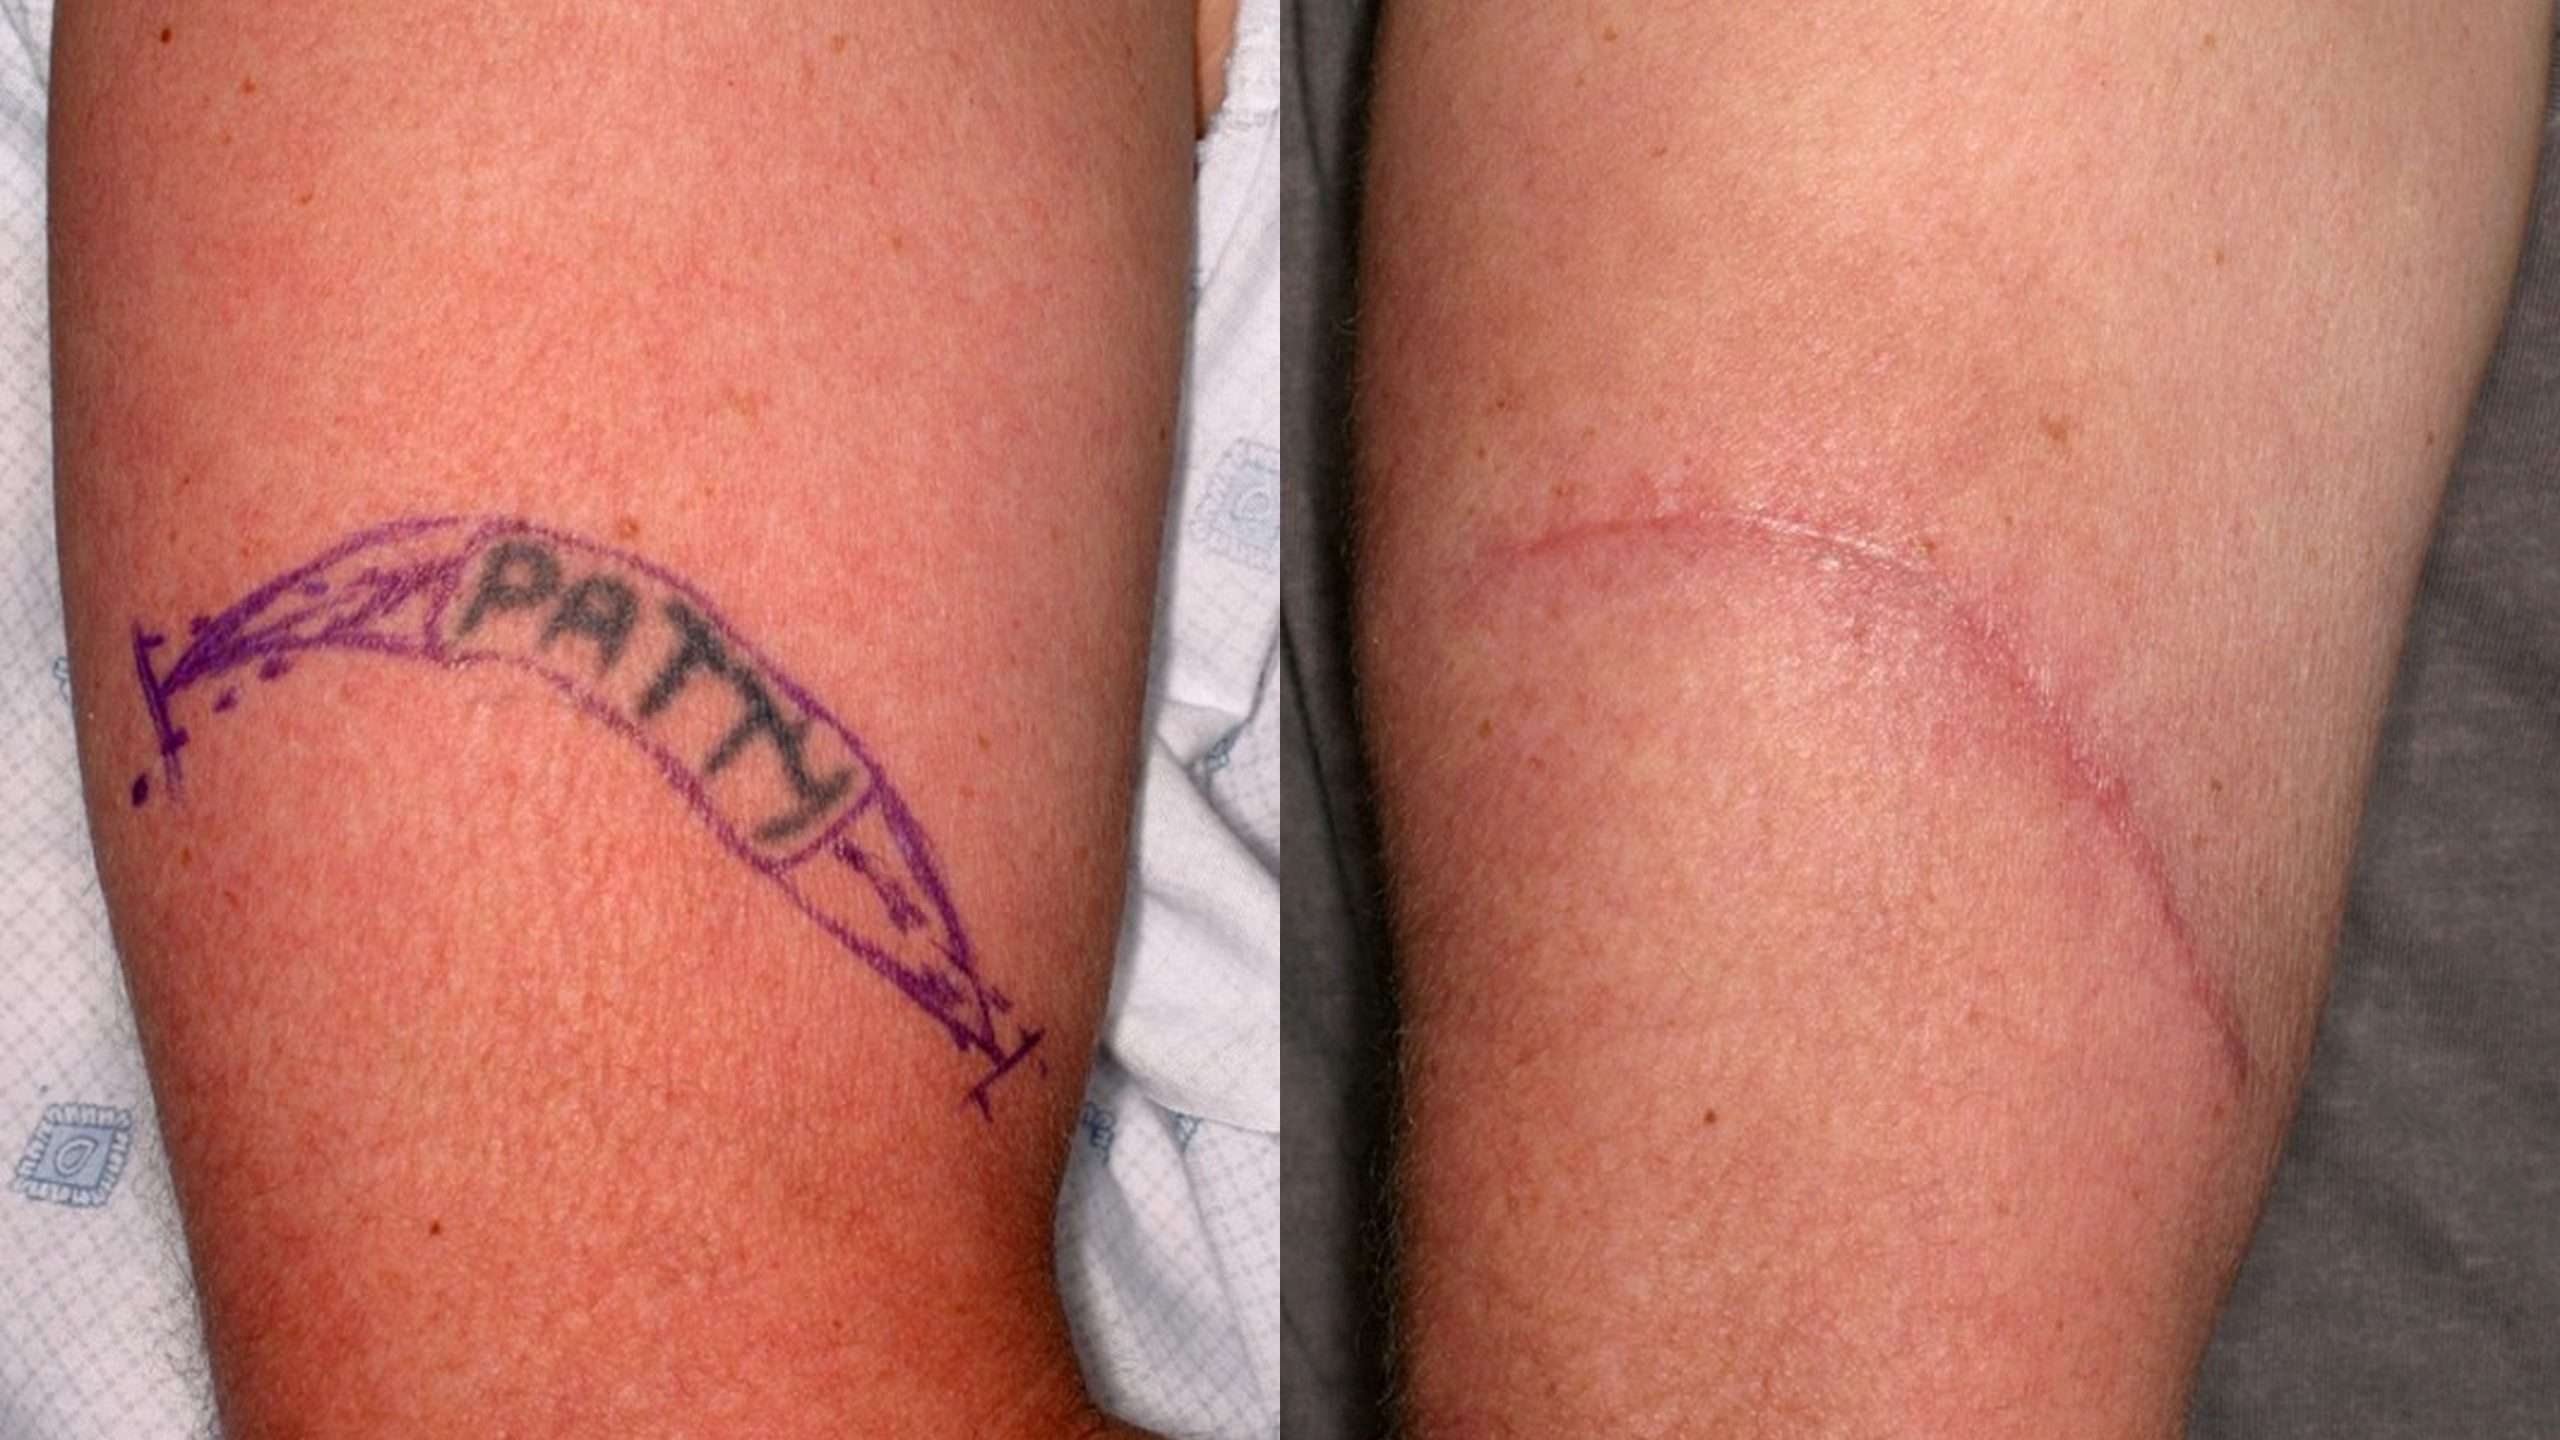 Does Laser Tattoo Removal Cause Scarring